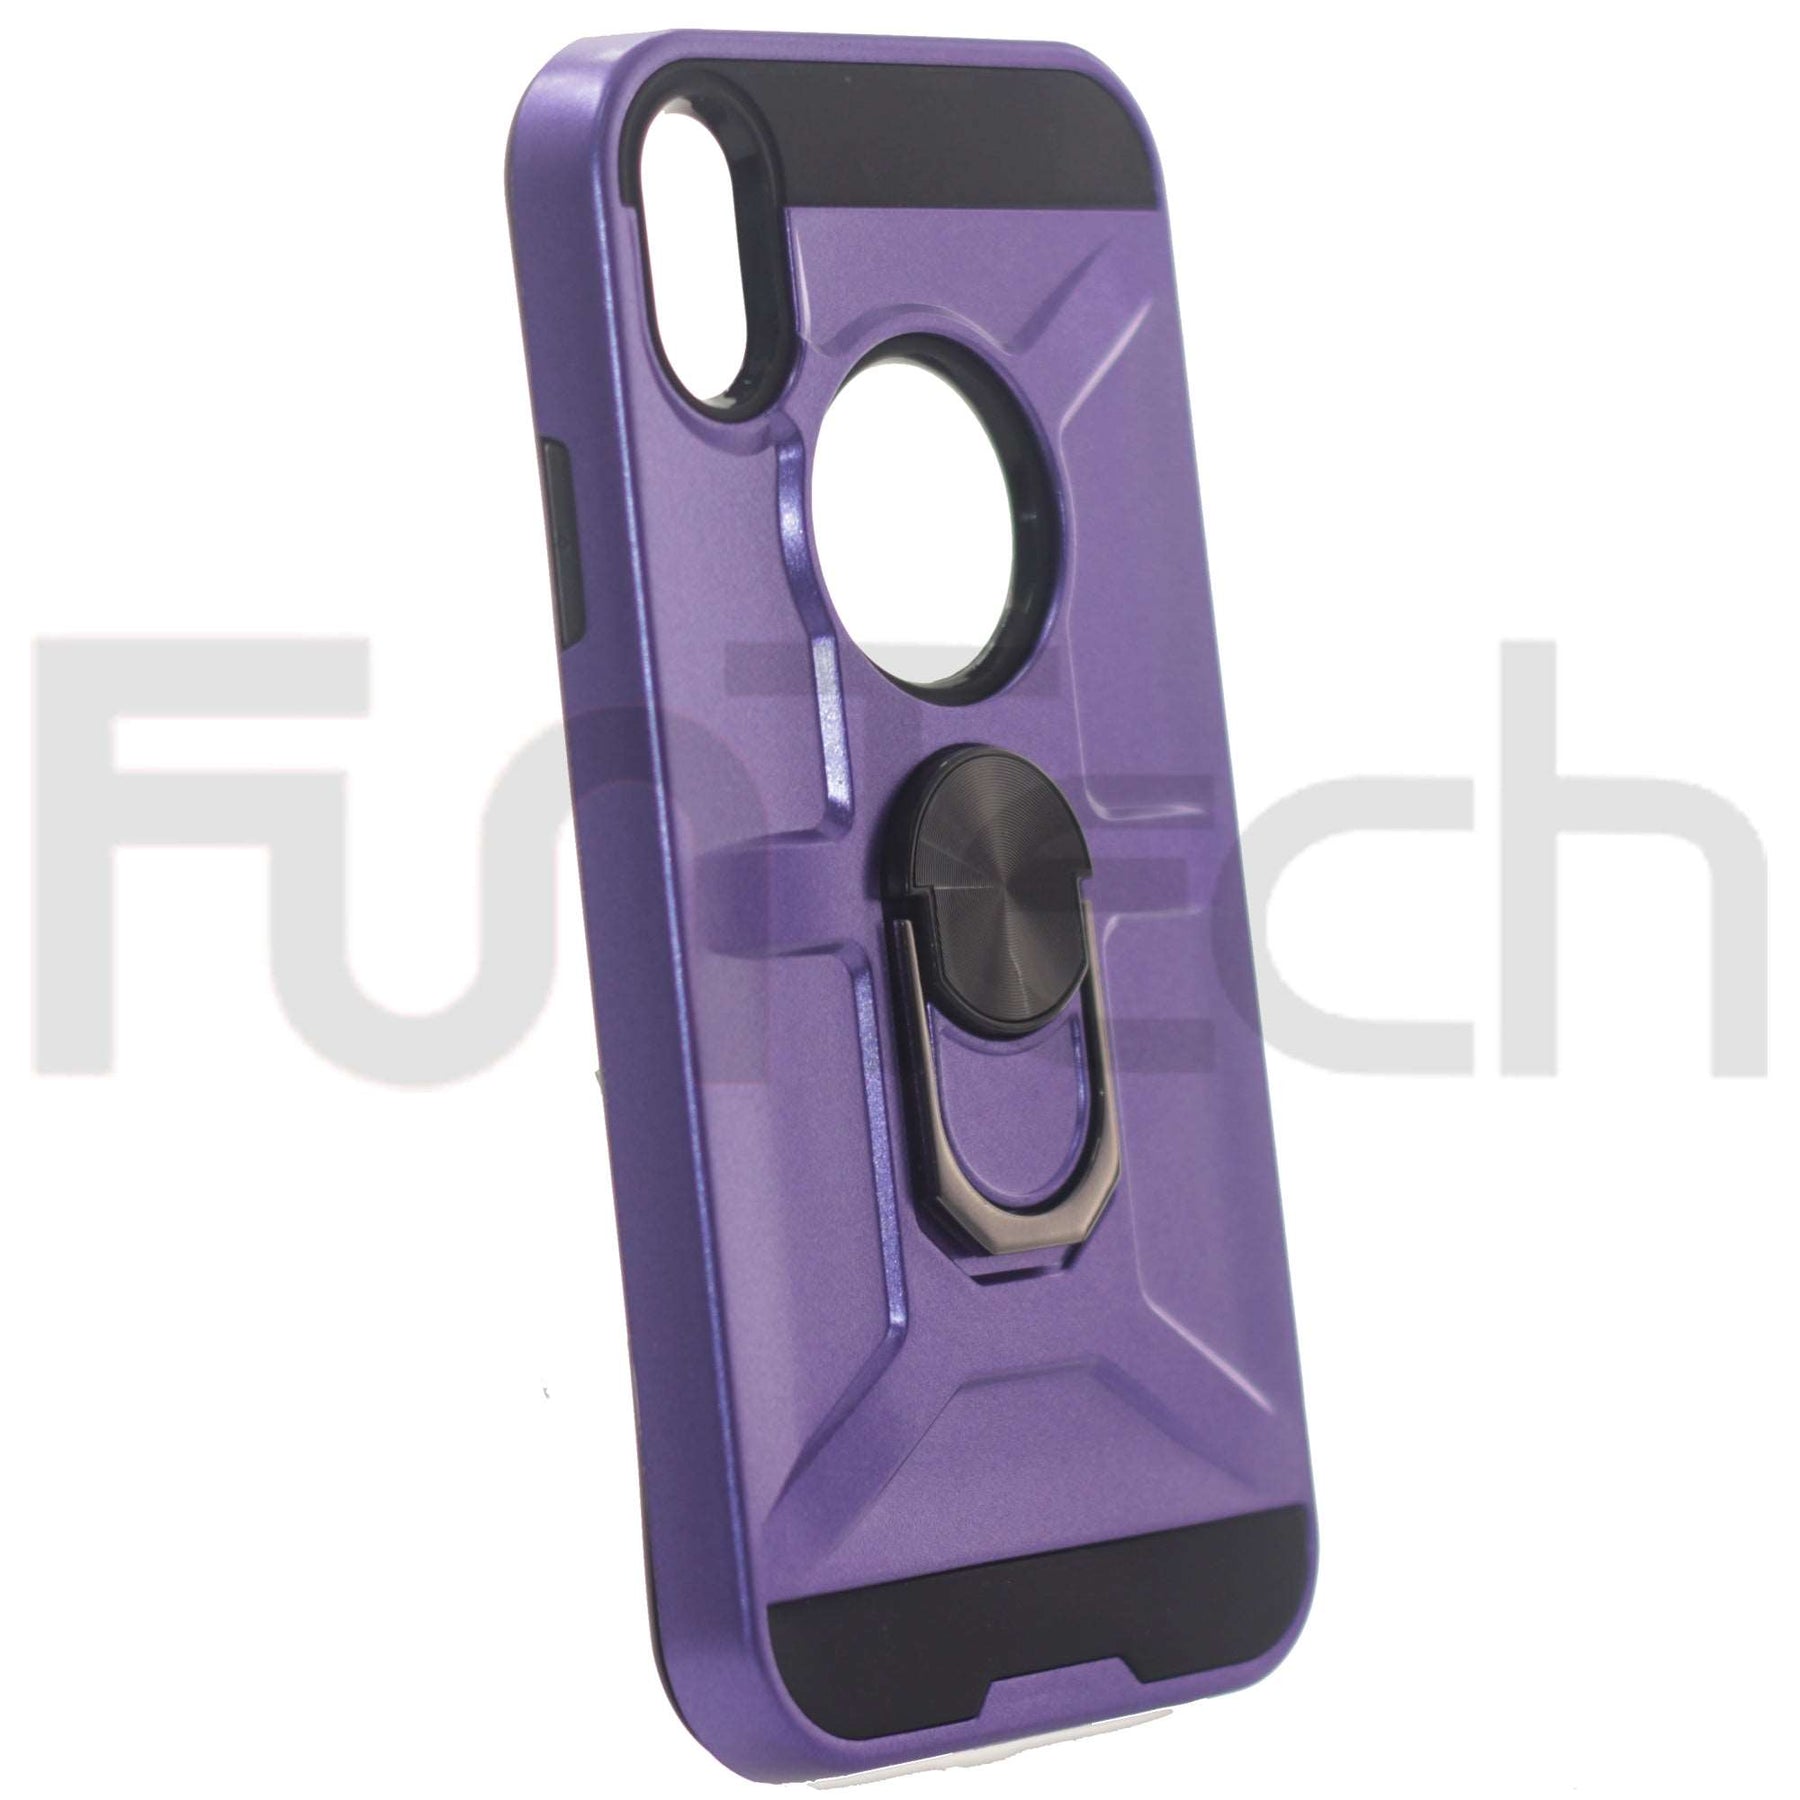 Apple iPhone XR, Ring Armor Case, Color Purple.